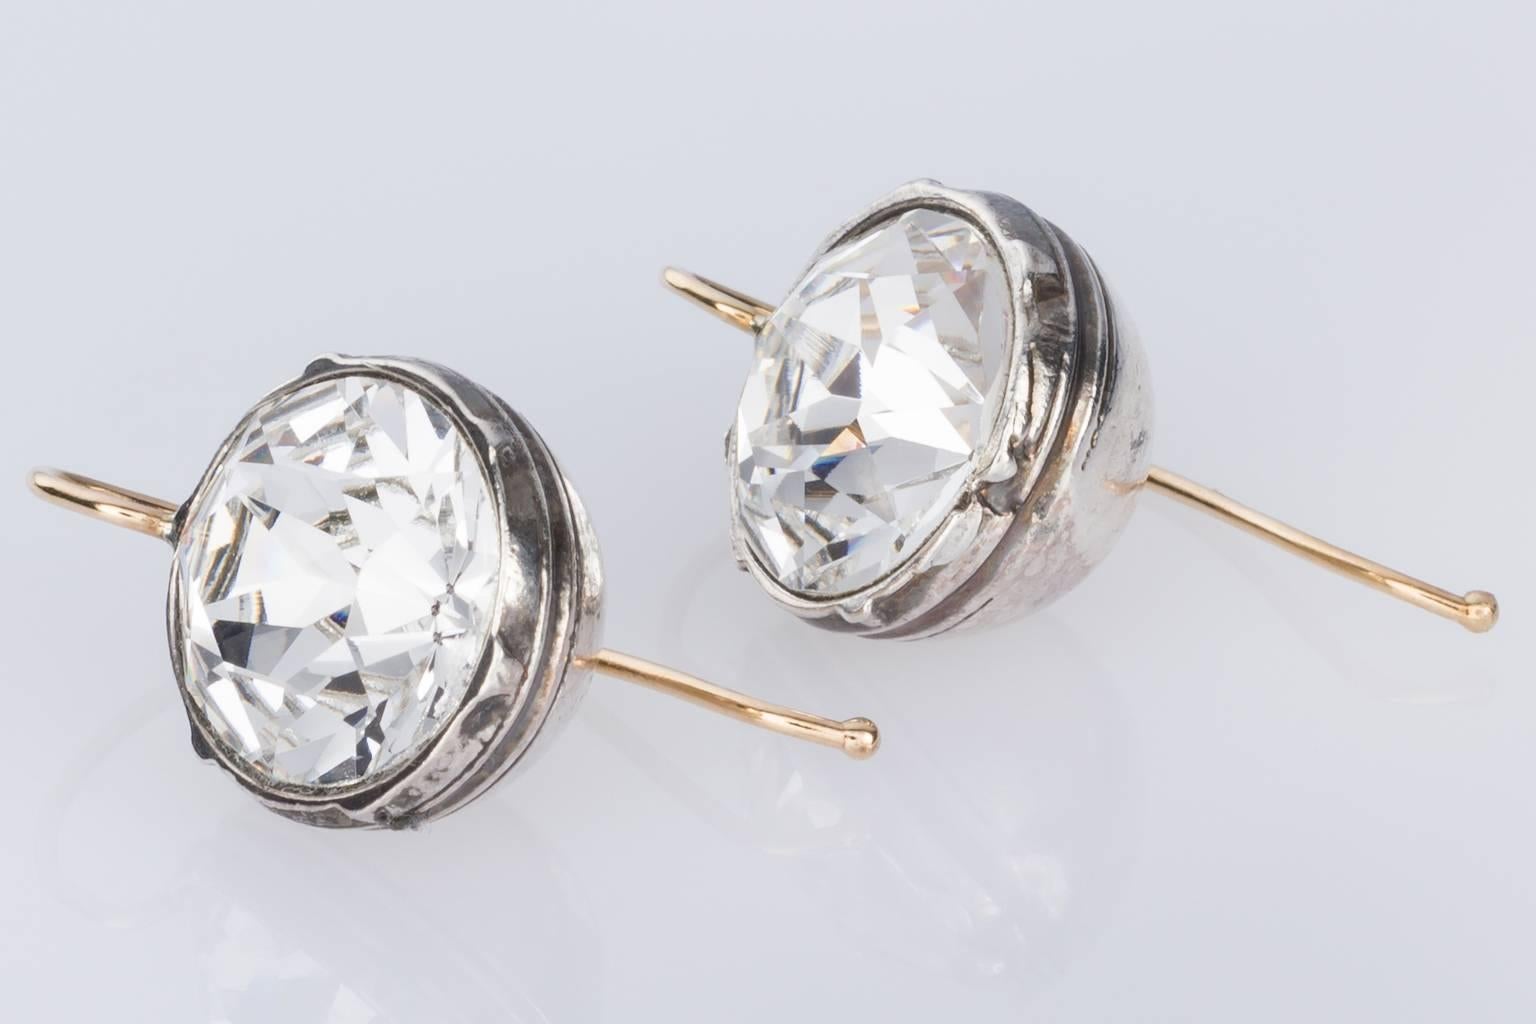 These fabulous paste earrings will turn heads. They are so sparkly and they look just like old-cut diamonds.
Vintage paste set in sterling silver cups and 14k yellow gold ear wires, these earrings are so simple to wear. They are easy to put in and